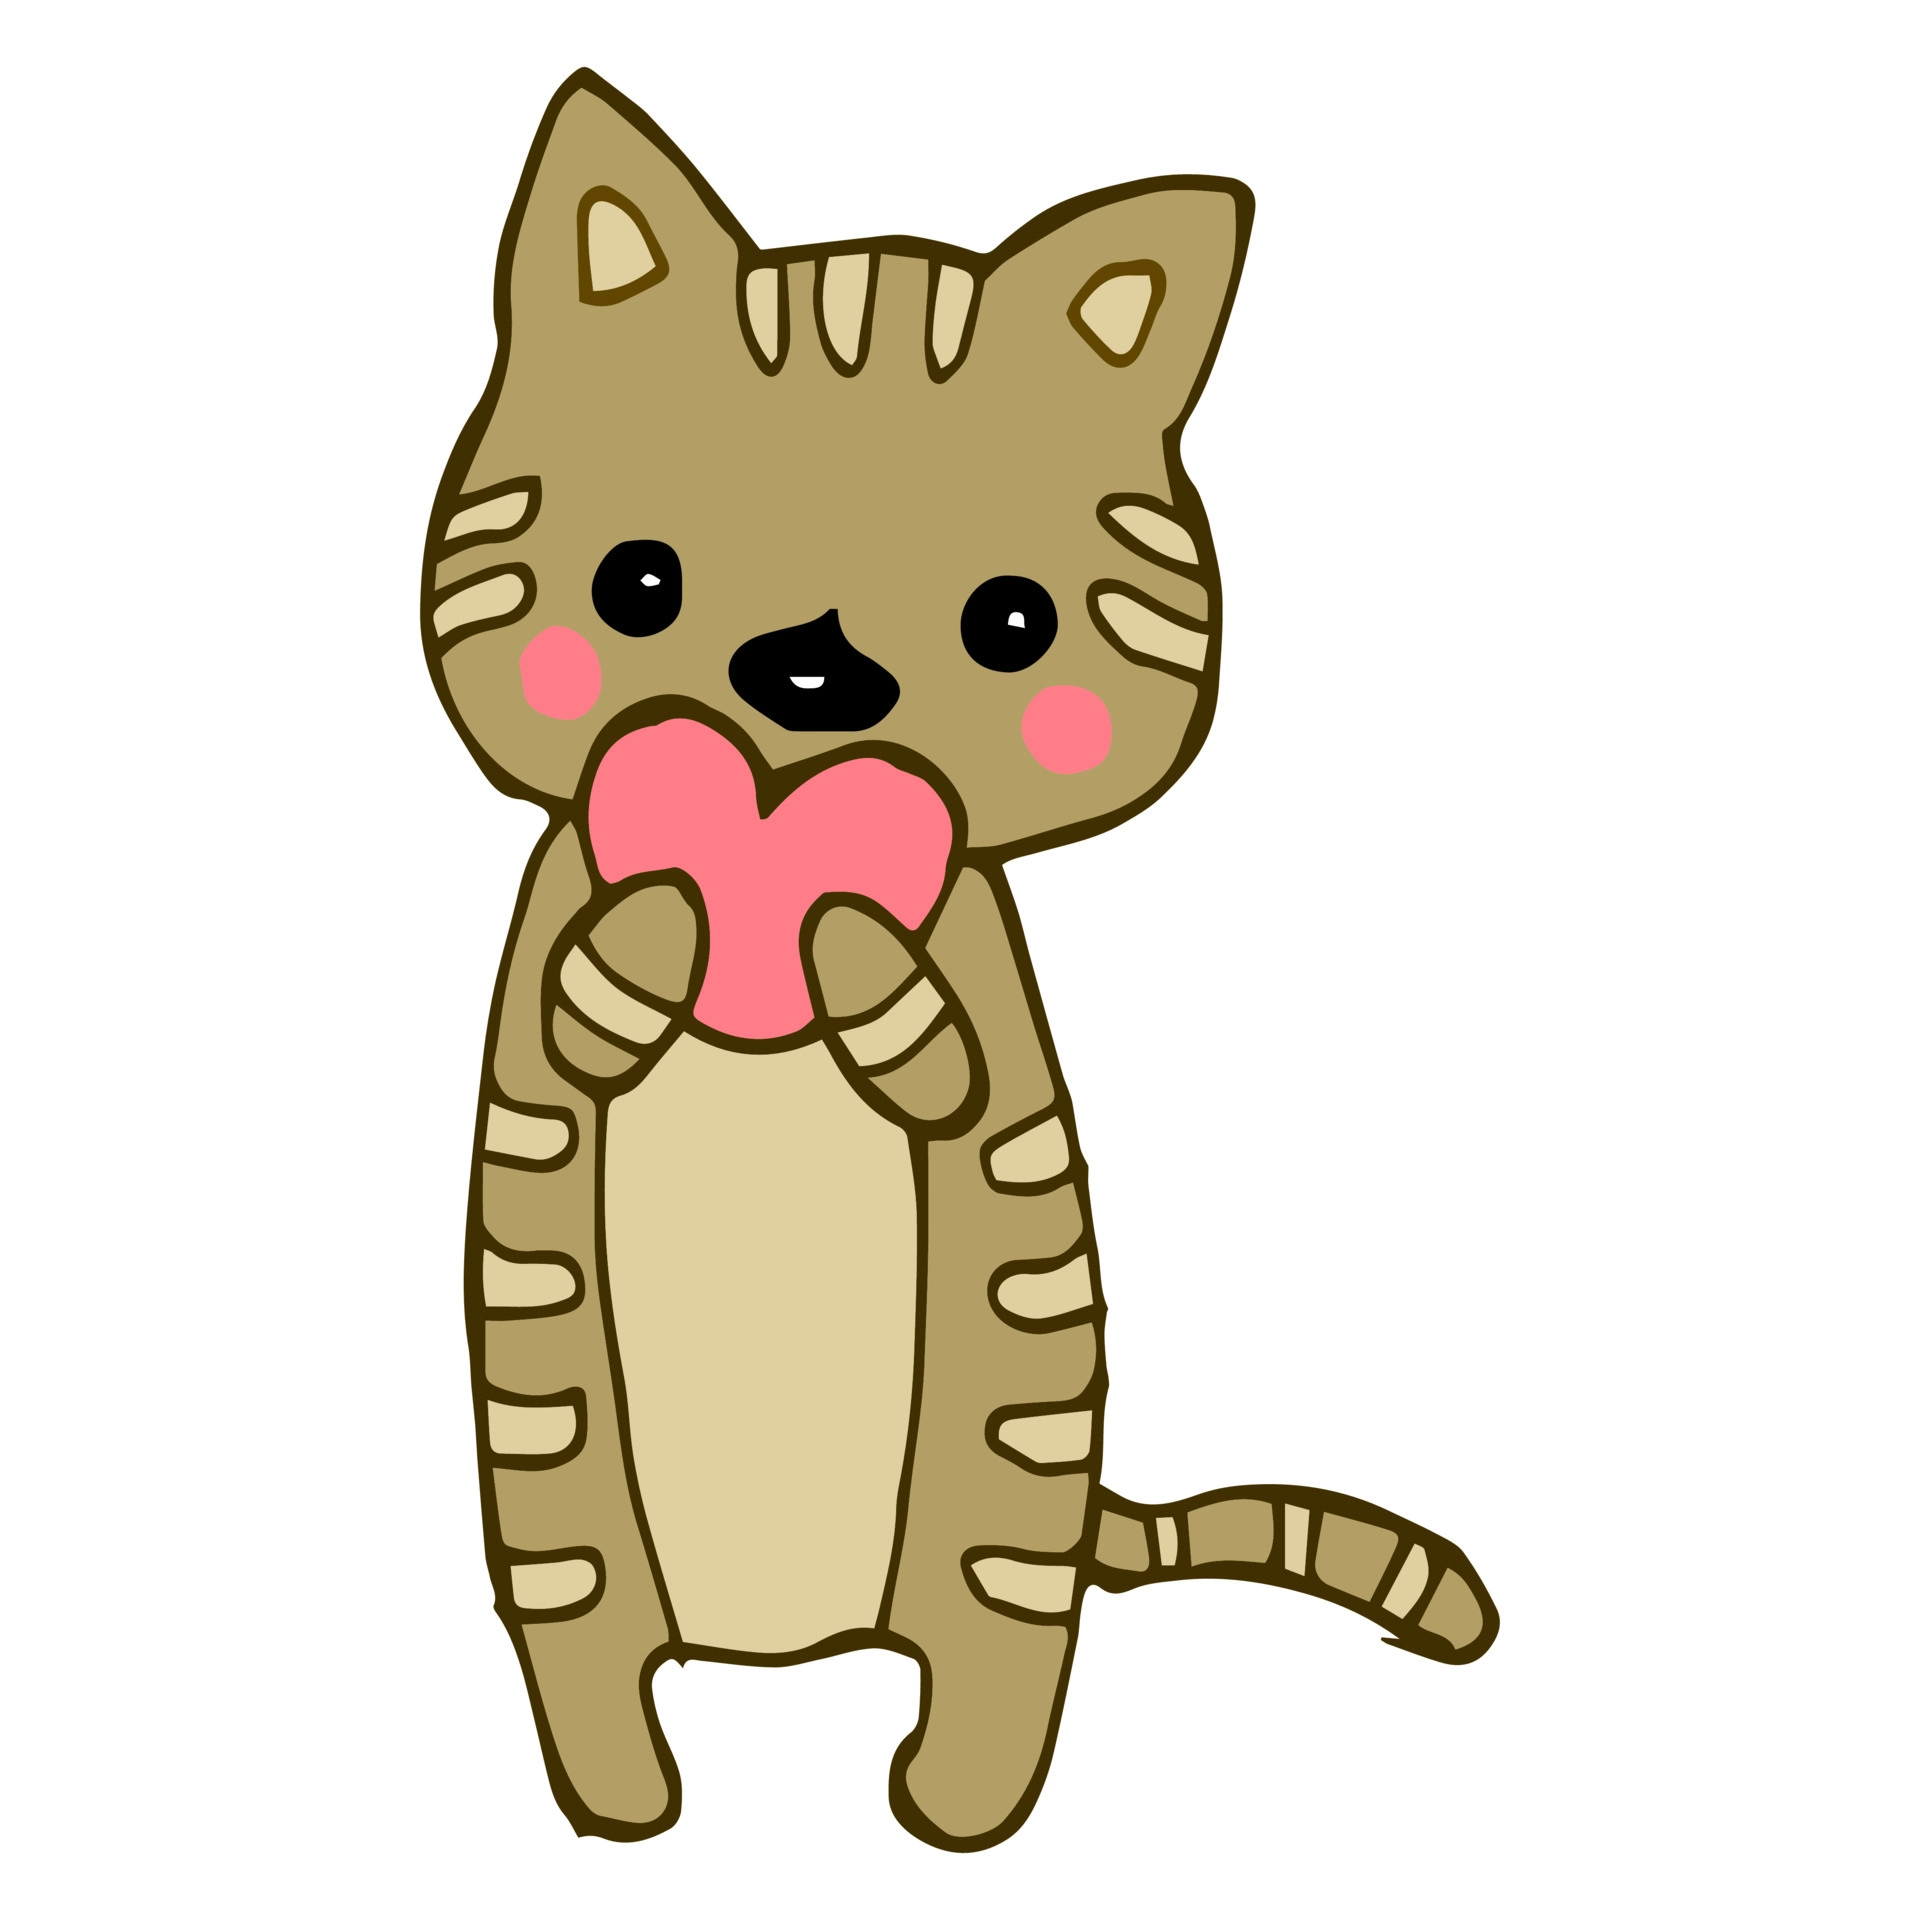 1920x1920 Hand-drawn illustration of a cute kitten hugging a heart. Design for birthday and St. Valentines day greeting cards, textiles, wallpaper 4660606 Vector Art